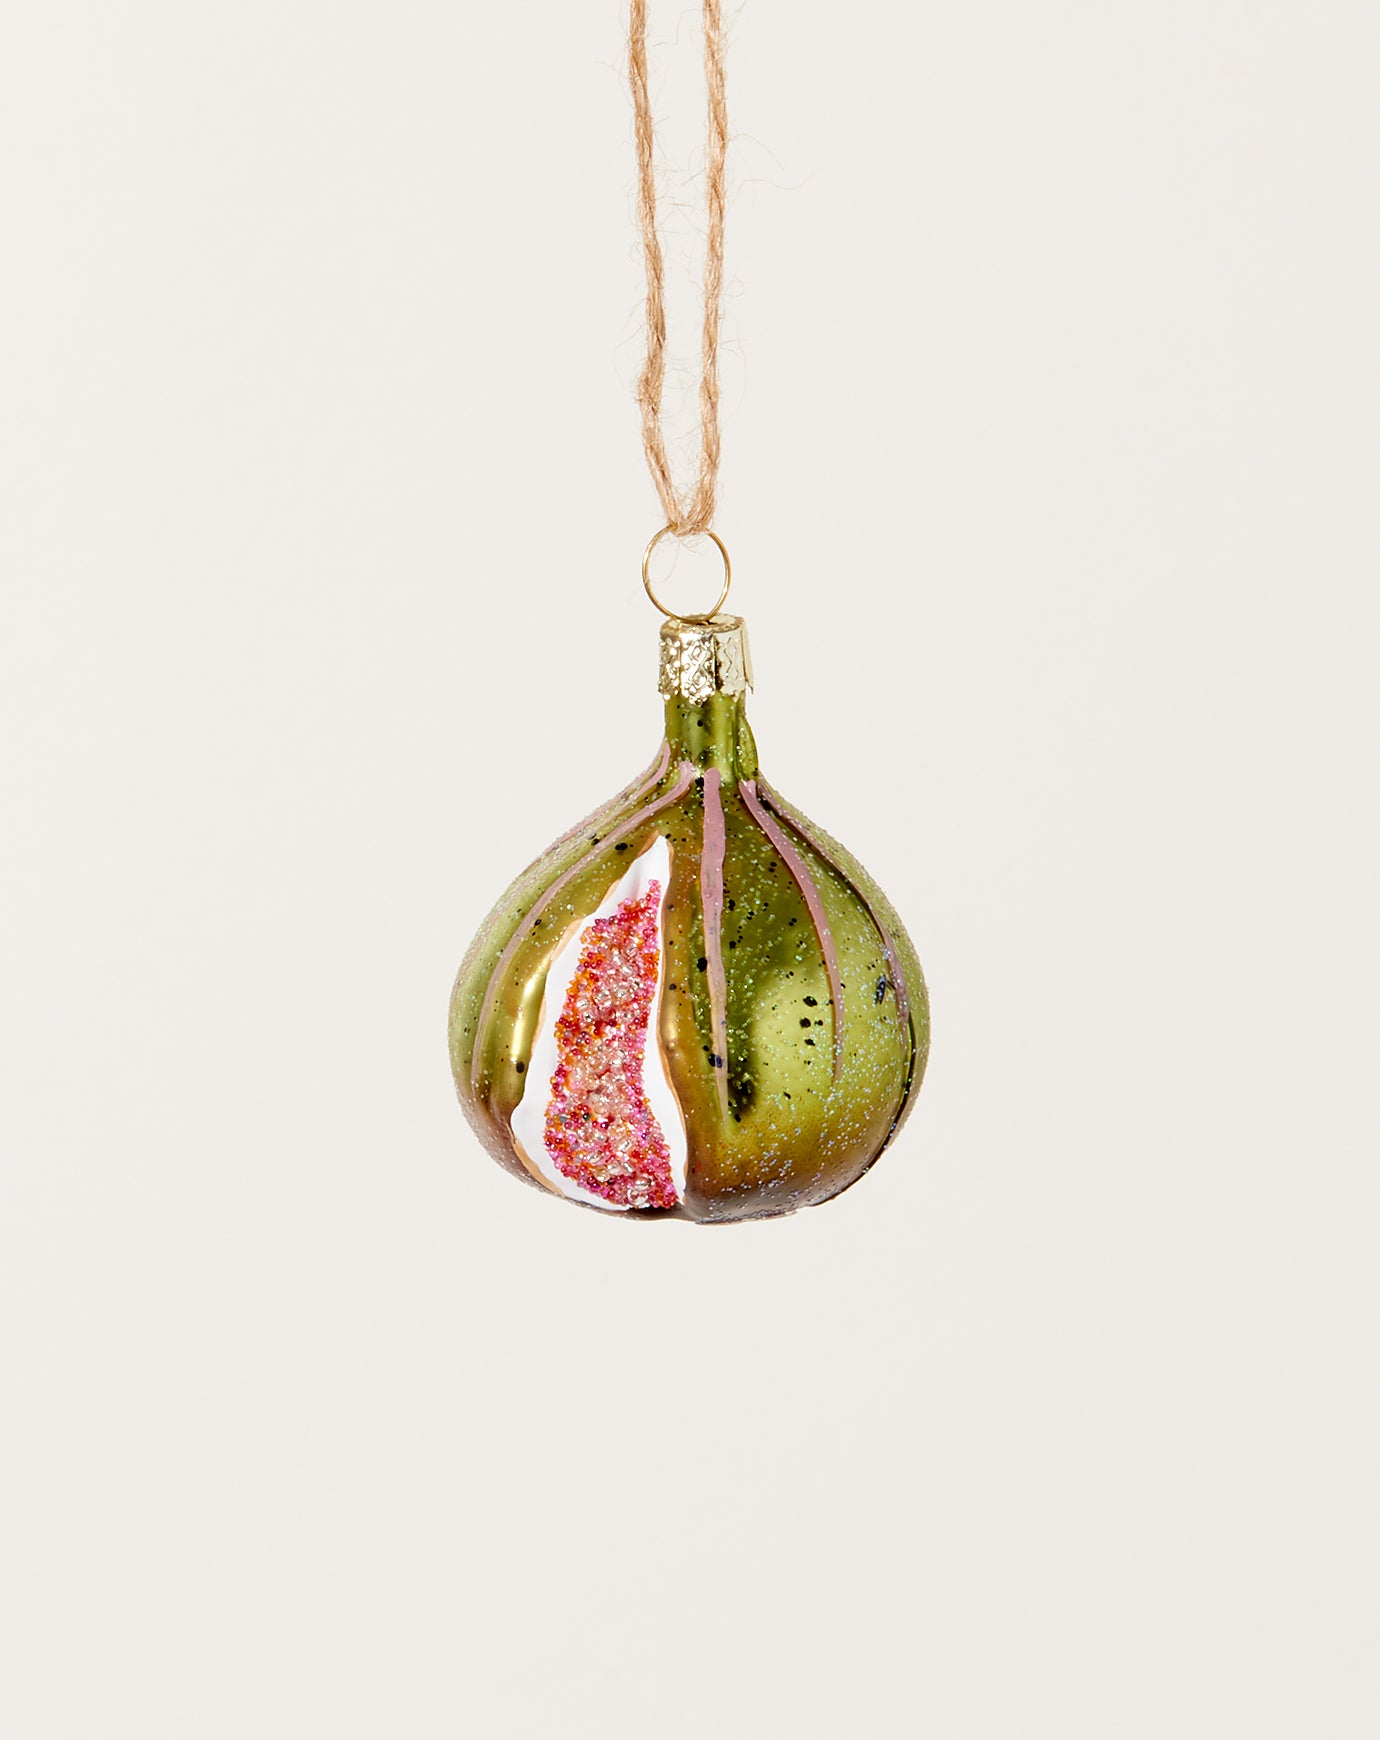 Cody Foster Orchard Fig Ornament in Green